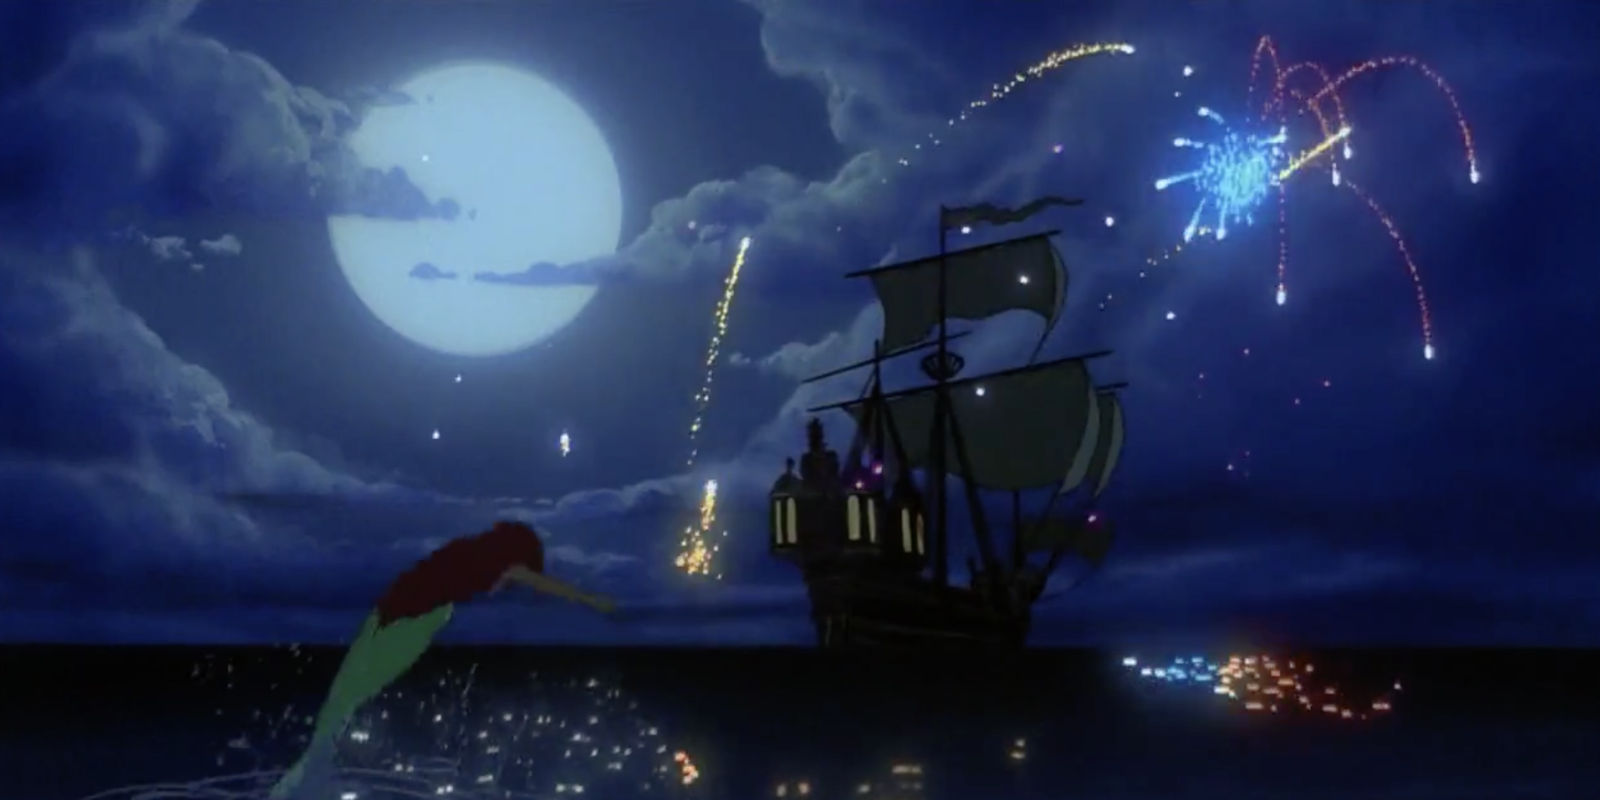 21 Burning Questions I Have After Watching "The Little Mermaid" As An Adult